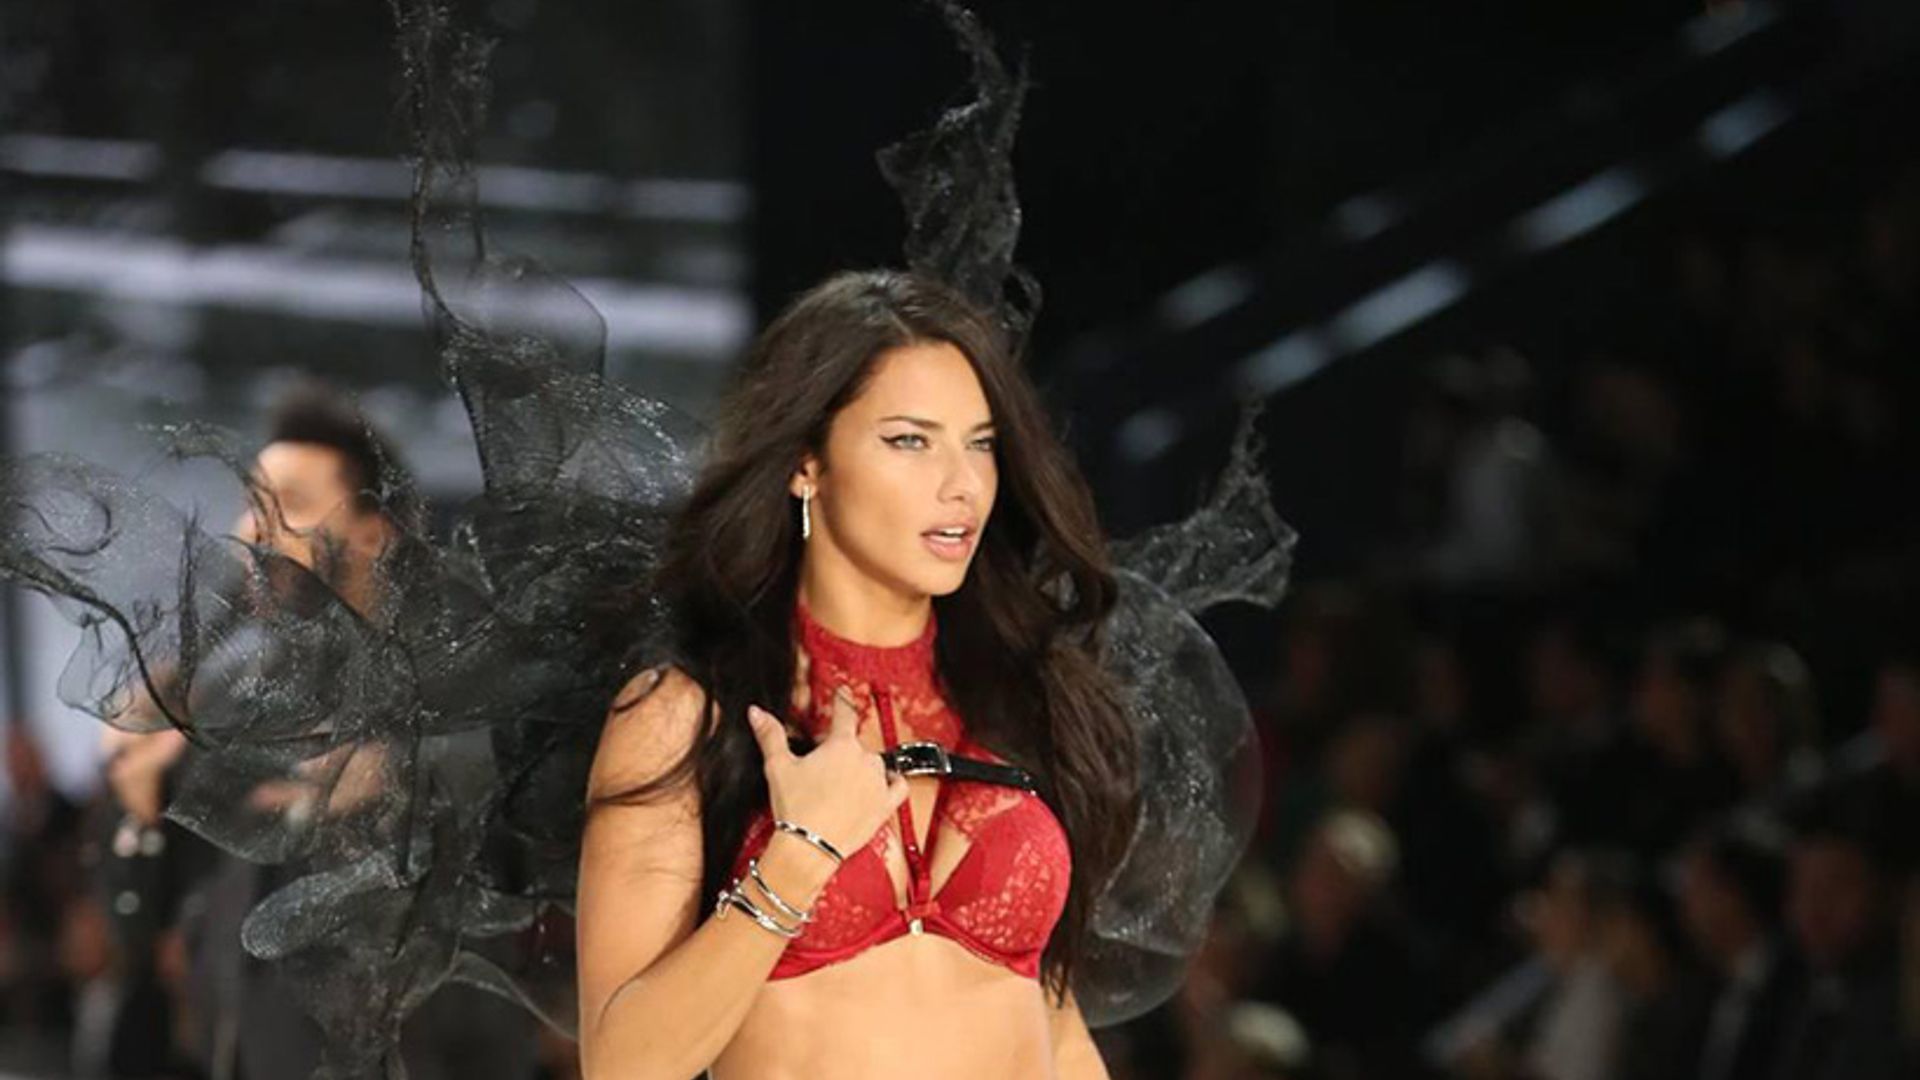 Adriana Lima stills wants to be an Angel at 40